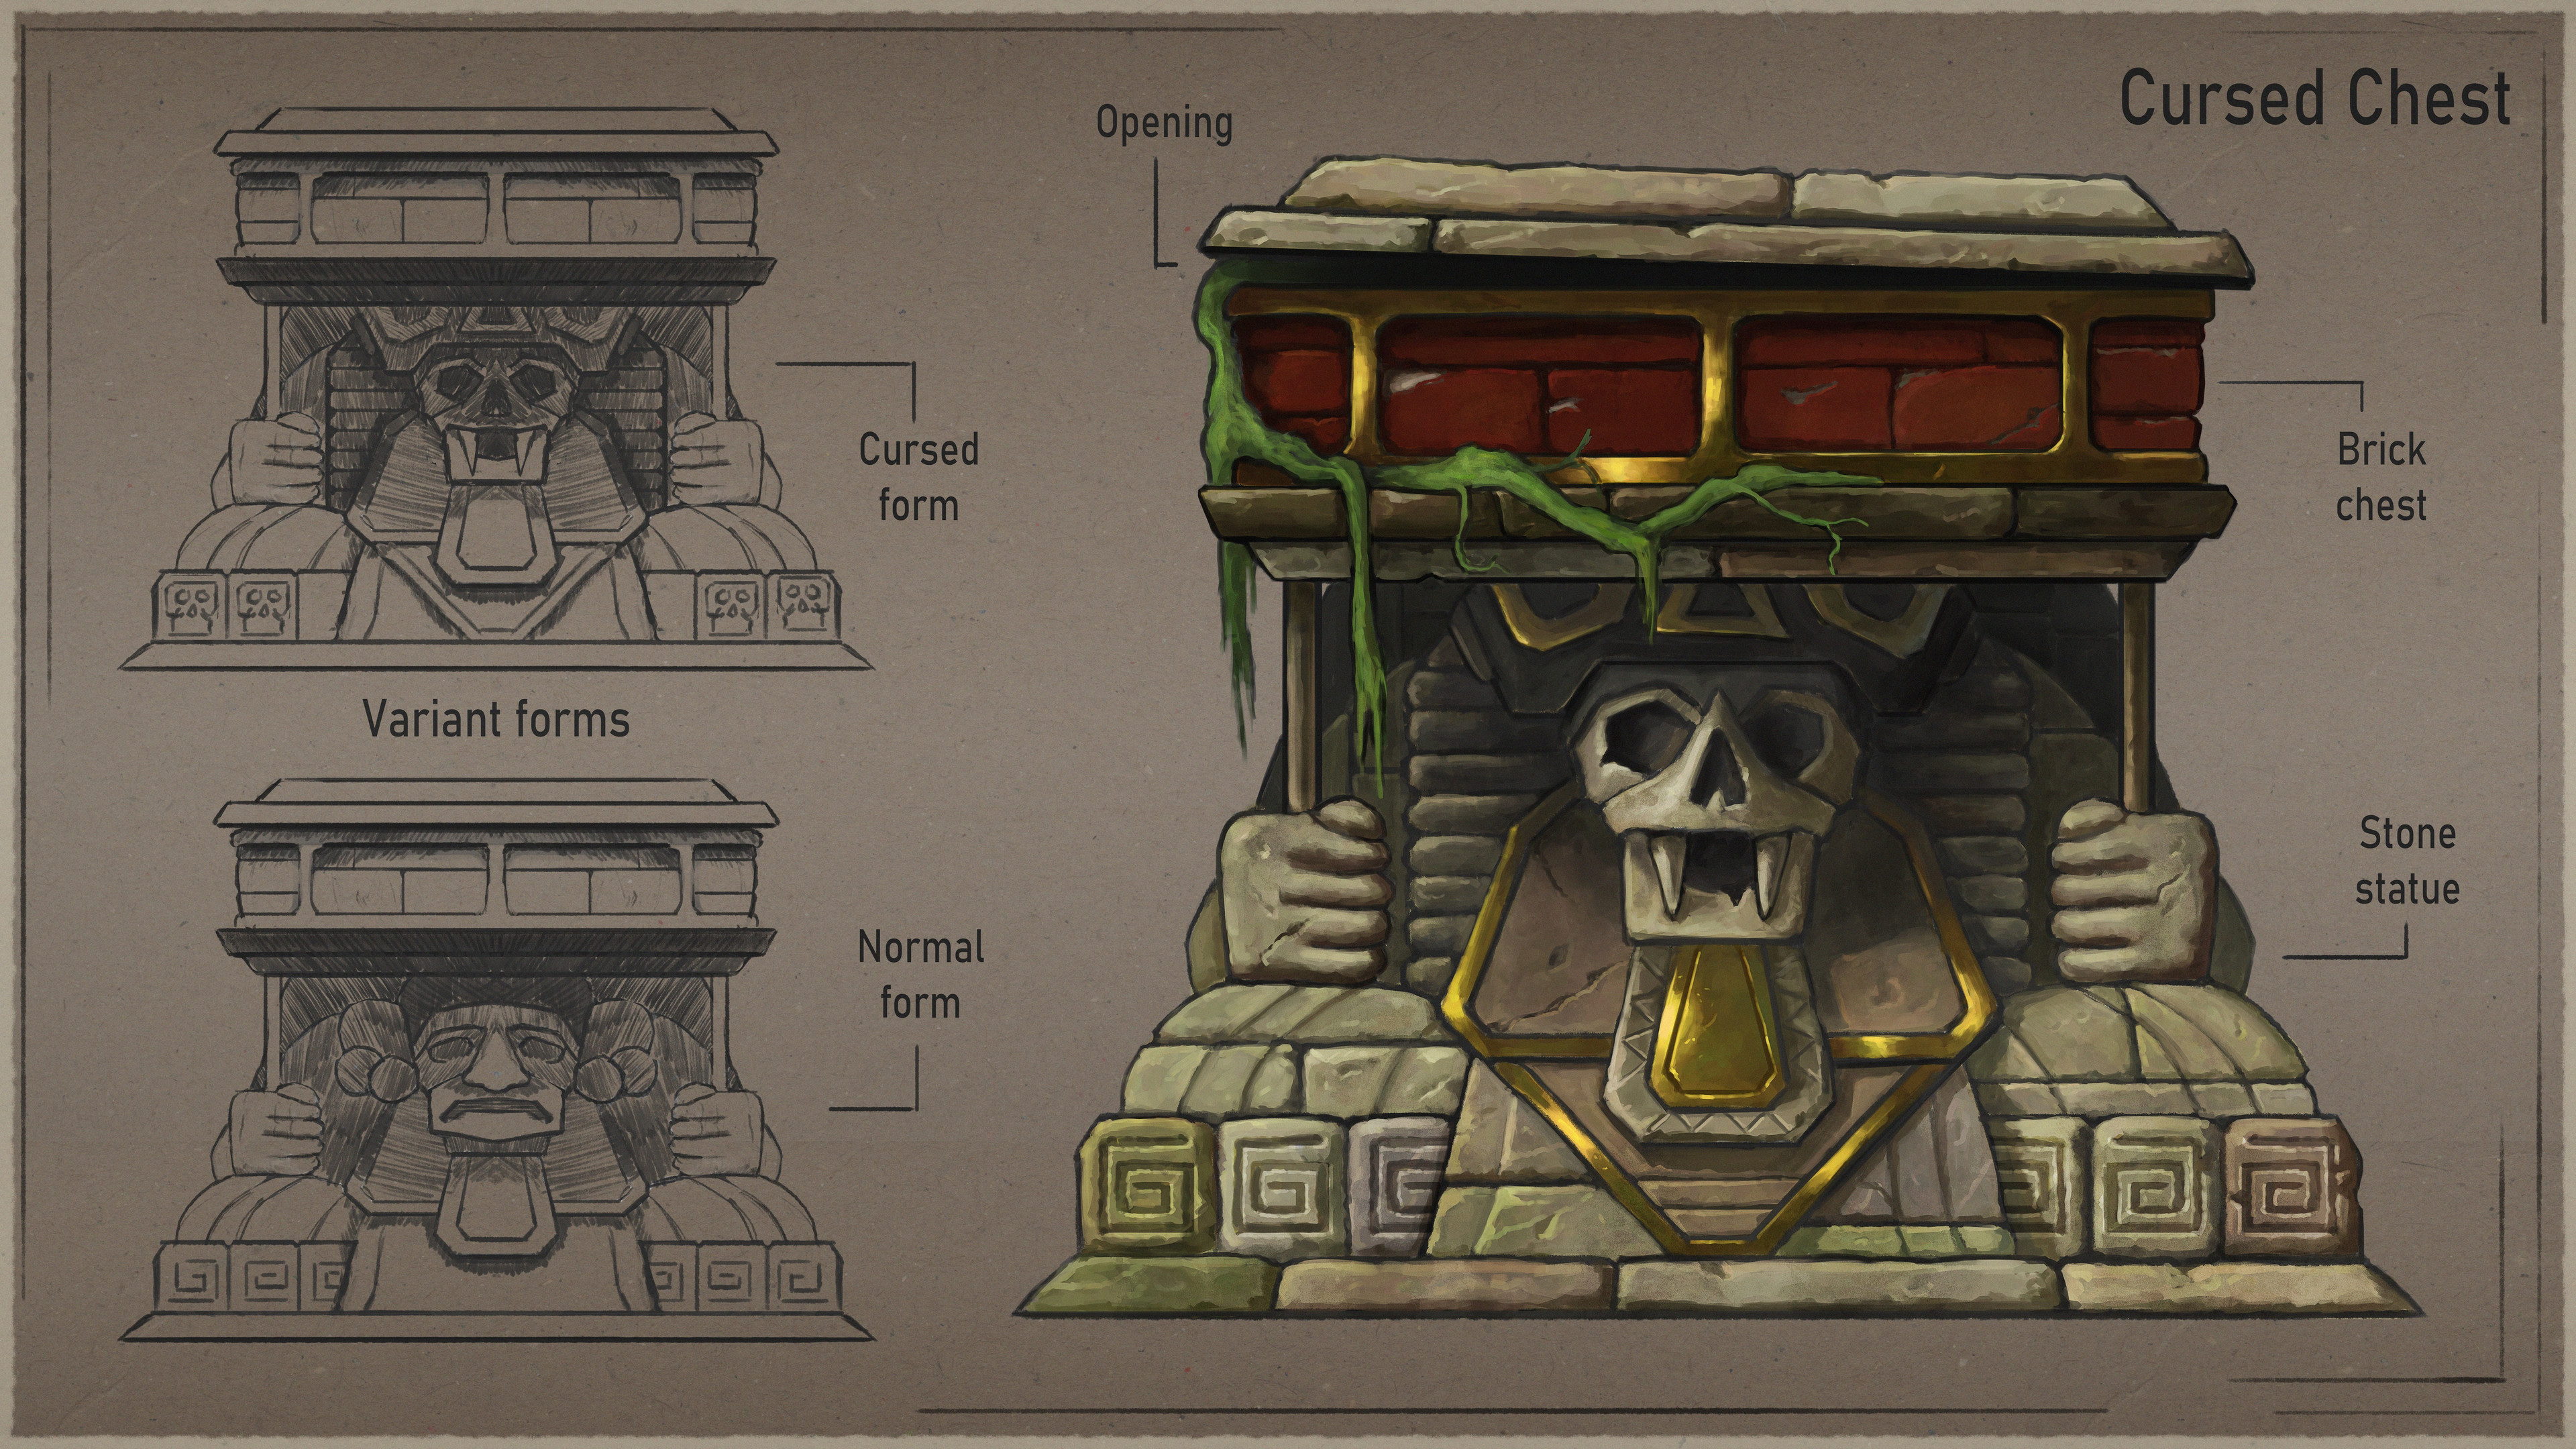 I liked the idea of this cursed chest having different appearances - 'cursed' and 'normal', with different loot and dangers depending on the circumstances.